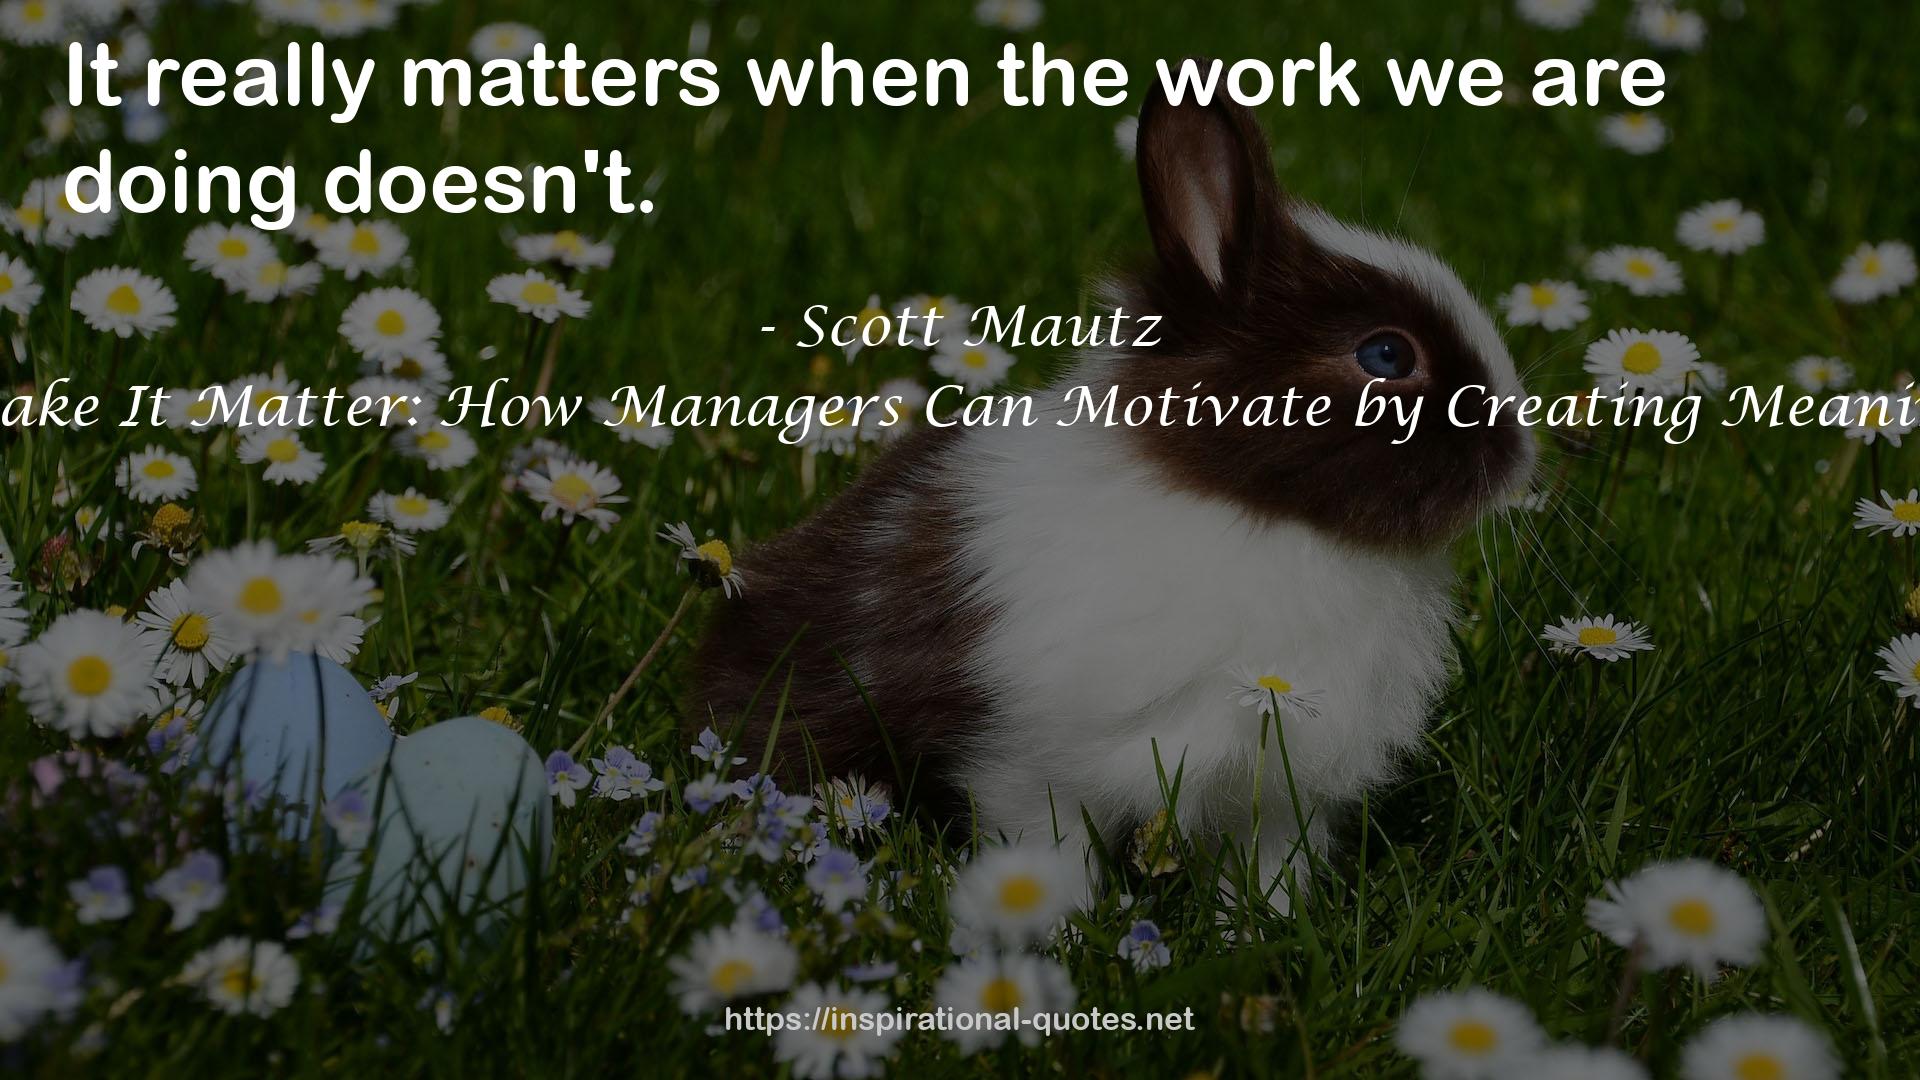 Make It Matter: How Managers Can Motivate by Creating Meaning QUOTES